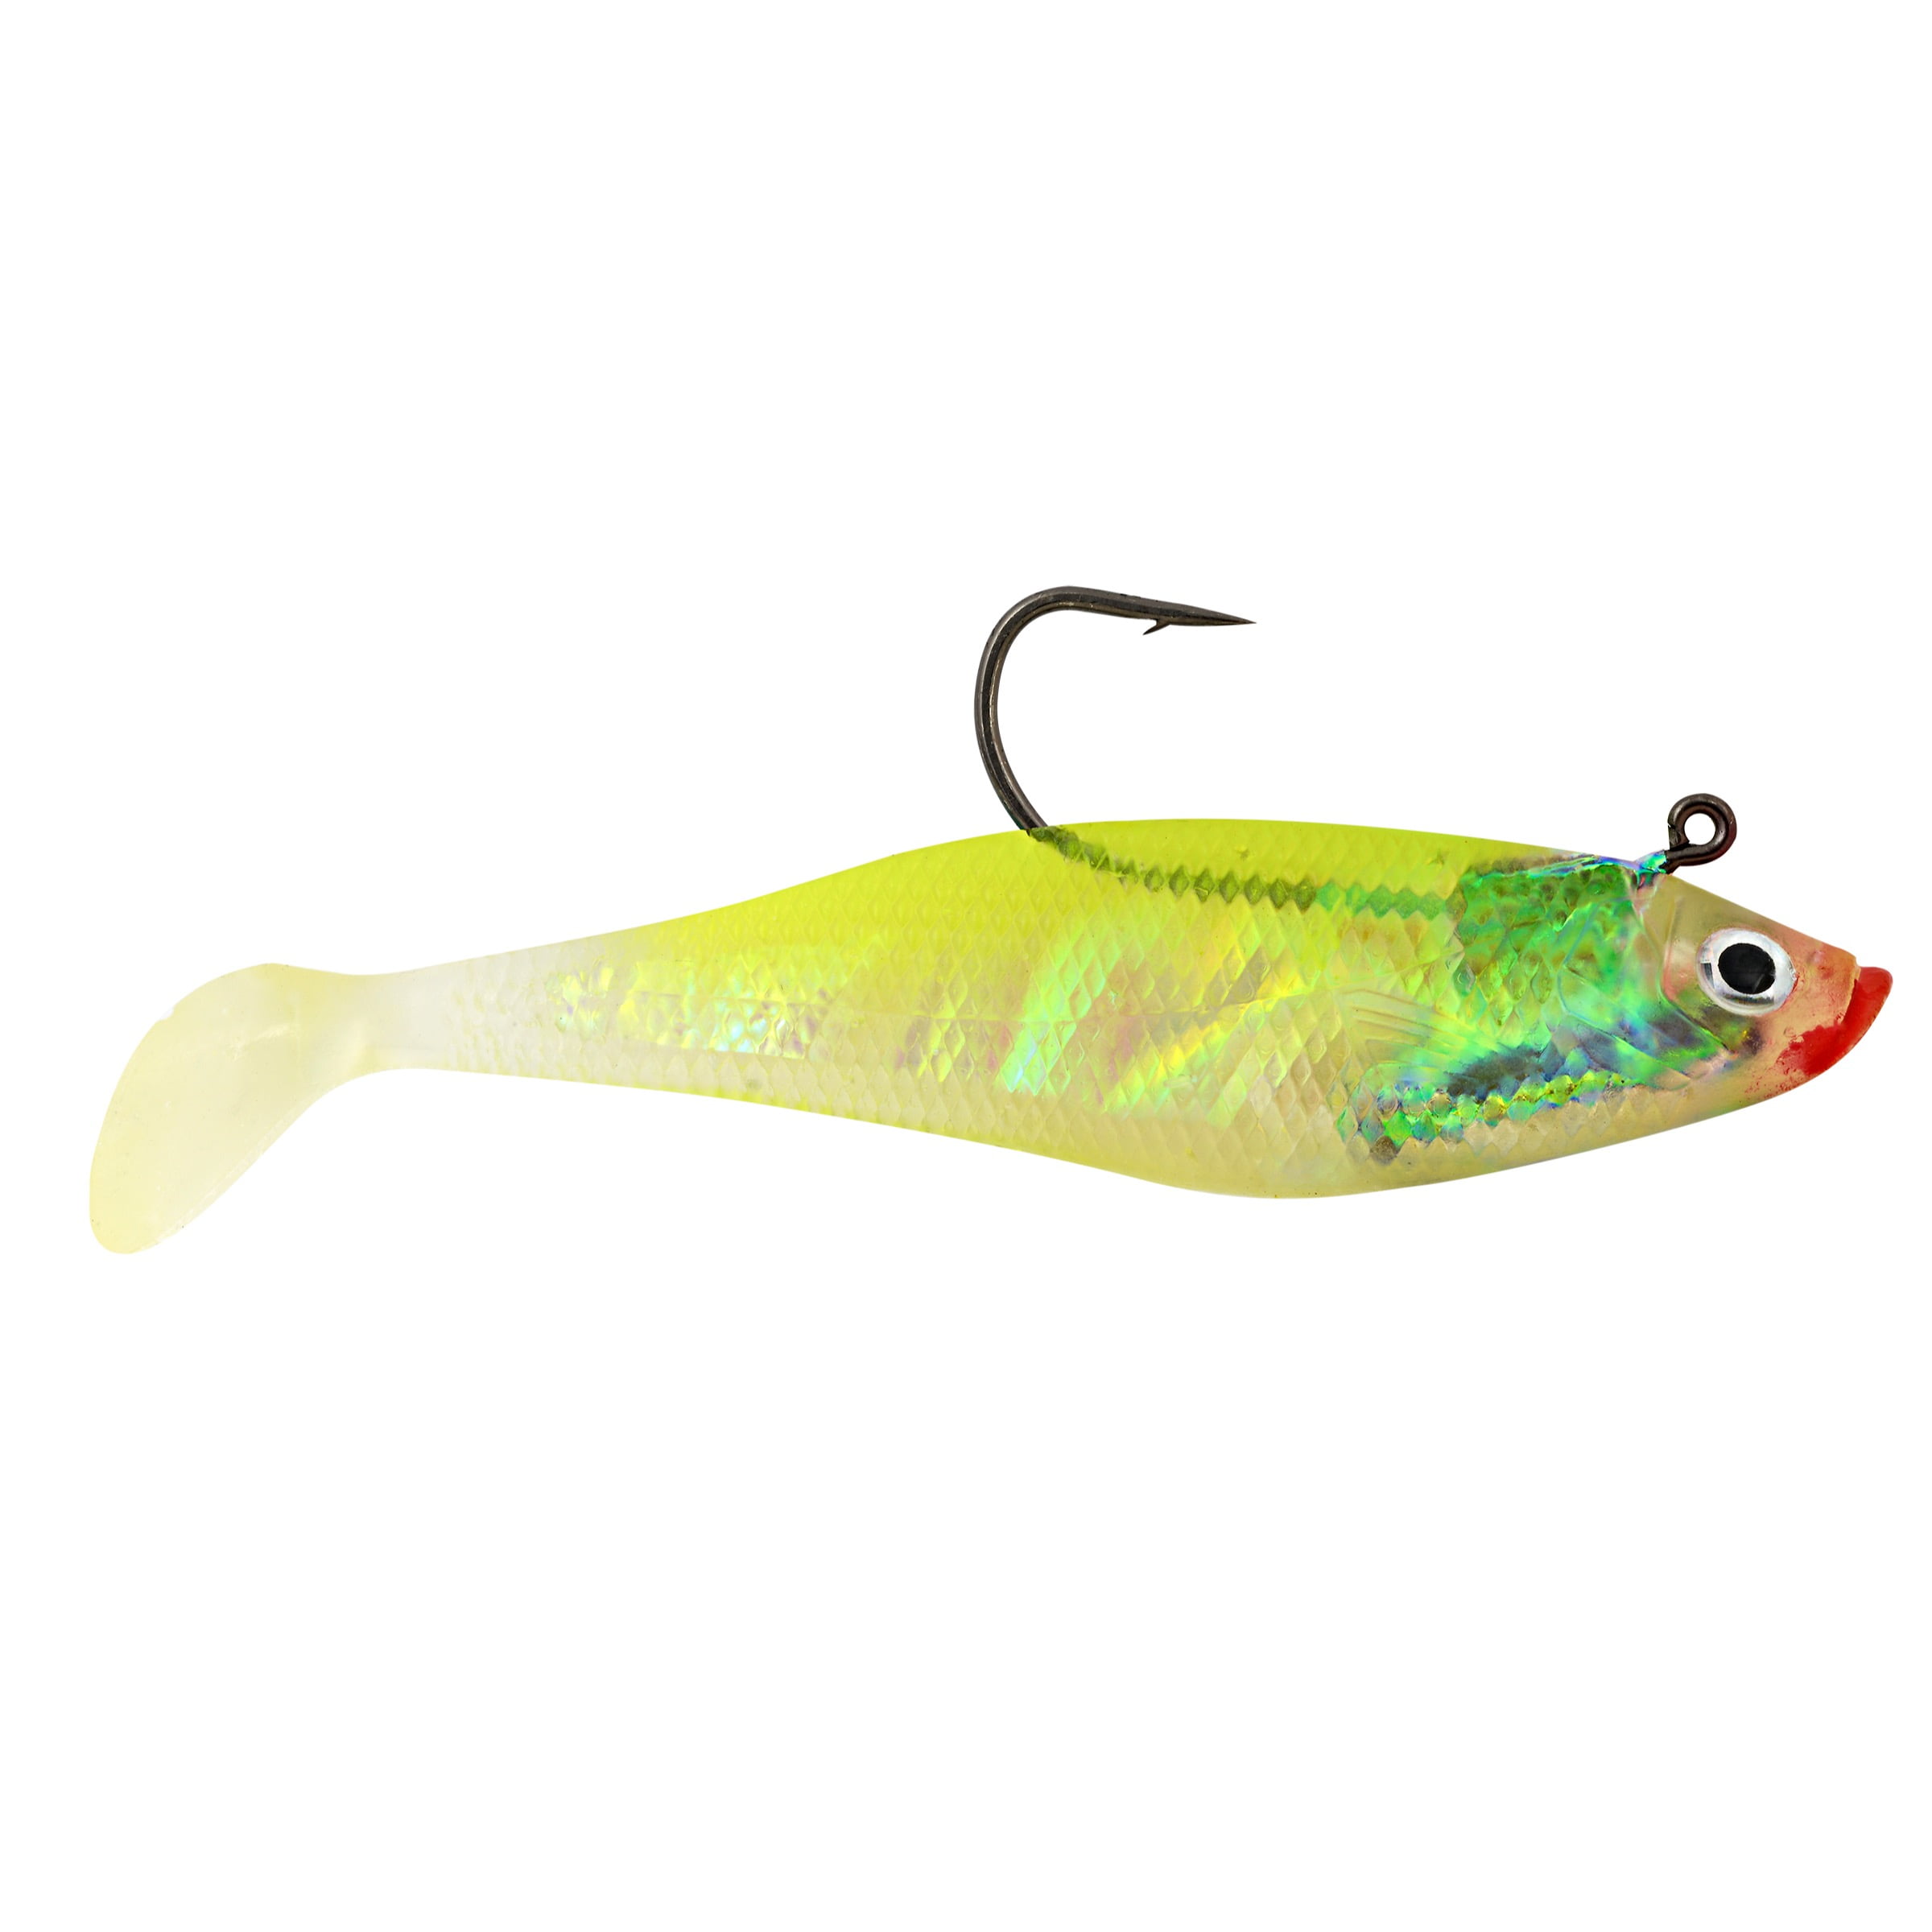 Hurricane Livewire Swim Shad 3 In. Chartreuse/Red Mouth-Chartreuse Tail,  SS3-5-66, Hard Baits 